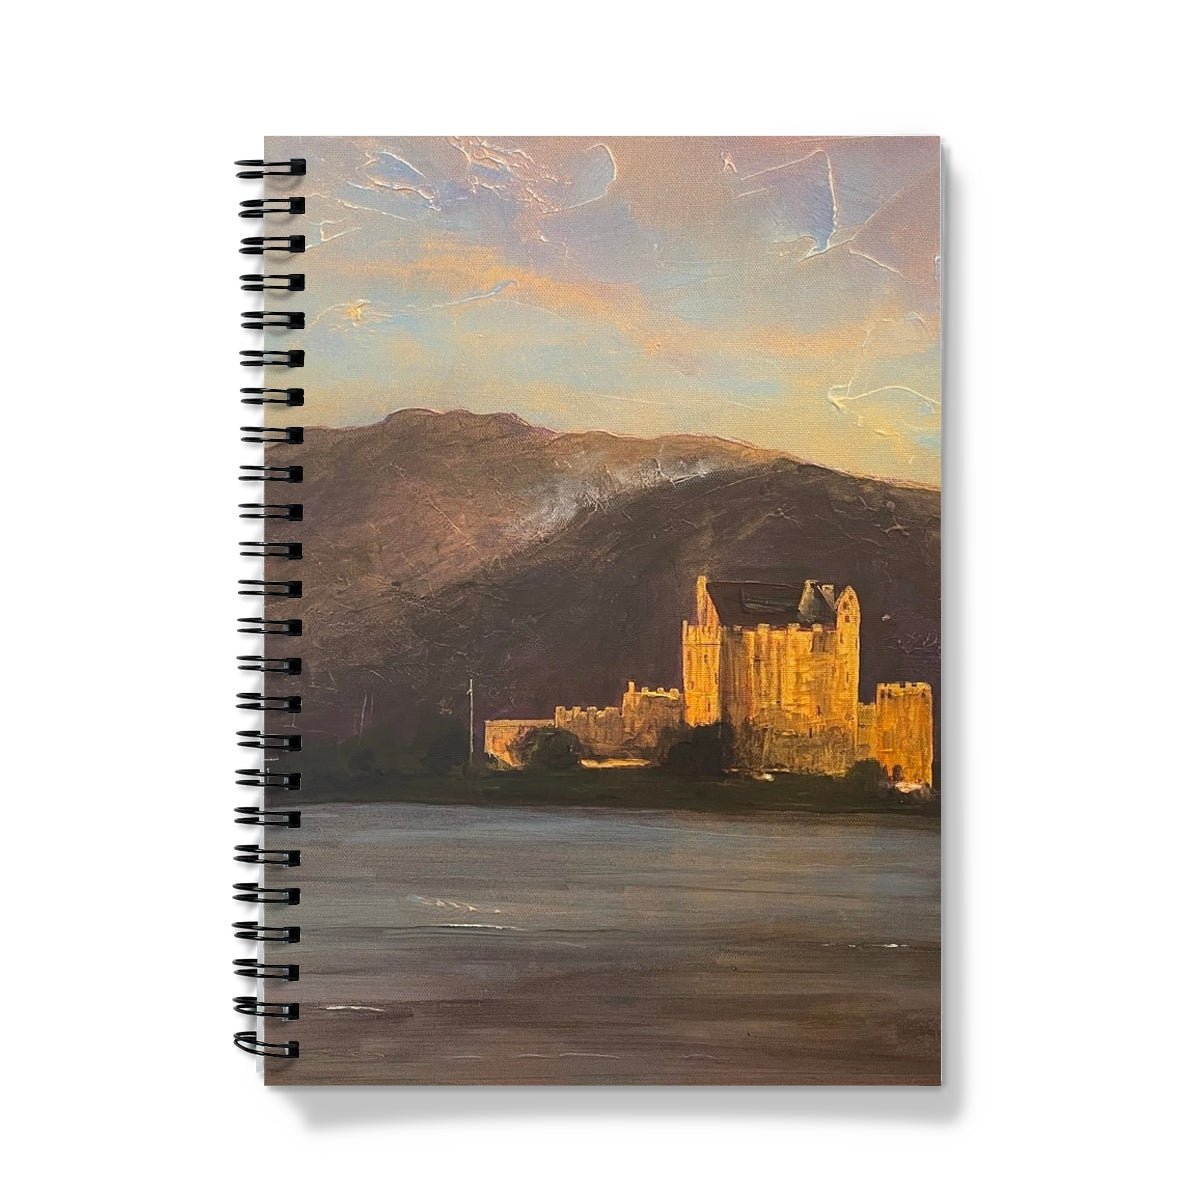 Eilean Donan Castle Art Gifts Notebook-Journals & Notebooks-Historic & Iconic Scotland Art Gallery-A4-Lined-Paintings, Prints, Homeware, Art Gifts From Scotland By Scottish Artist Kevin Hunter